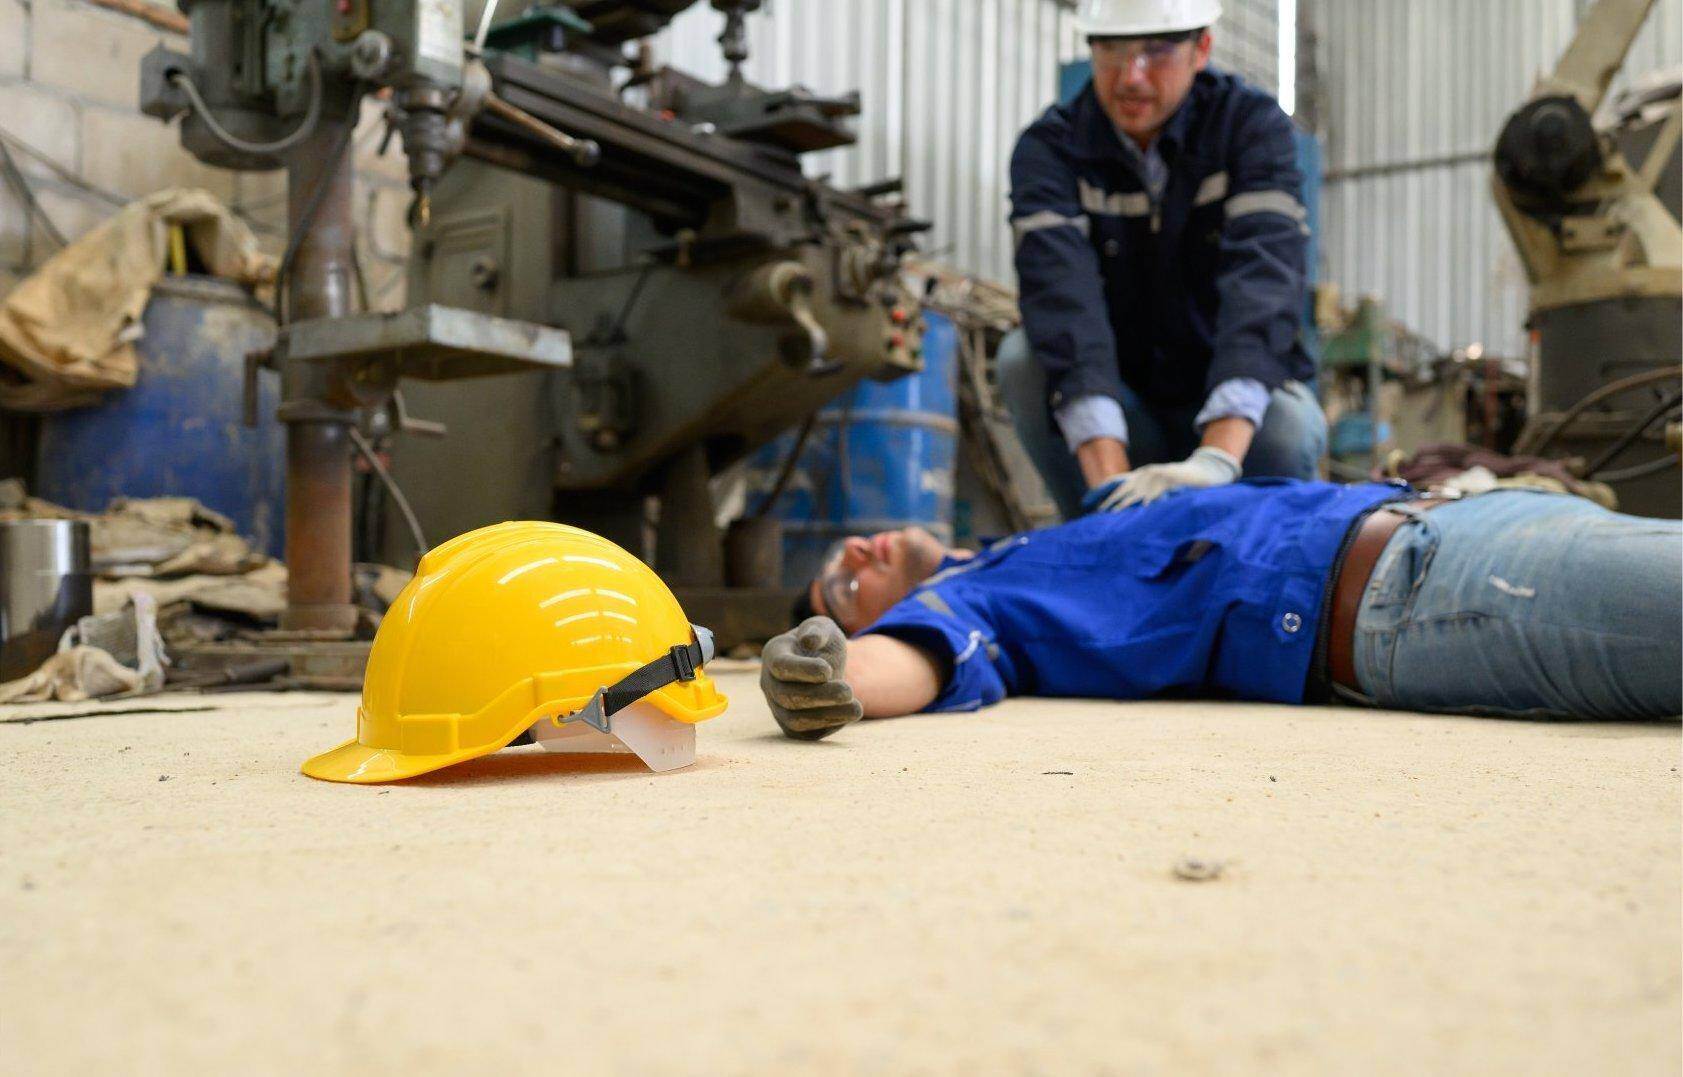 An unconscious man who has been injured on the job who will file for workers compensation in Villa Rica, Georgia